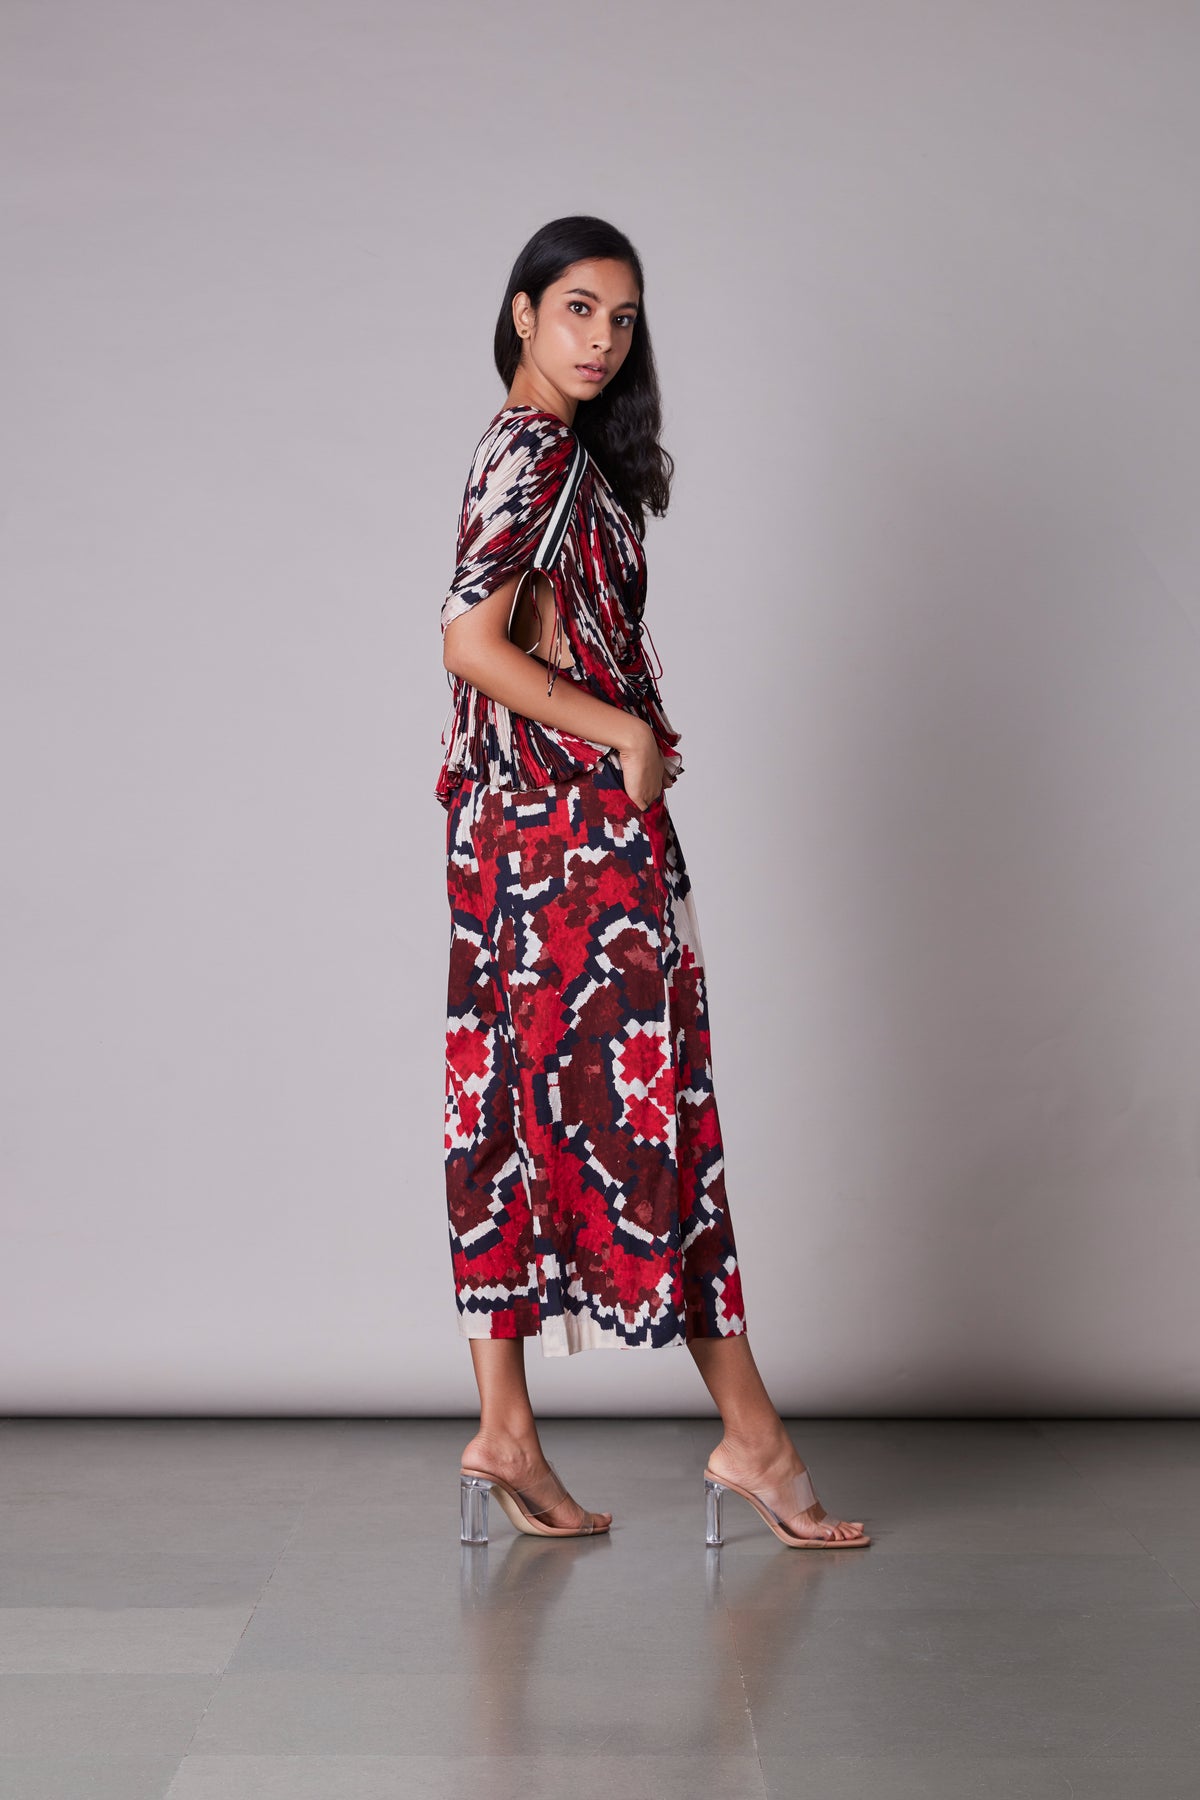 Ikat print blouse with culottes